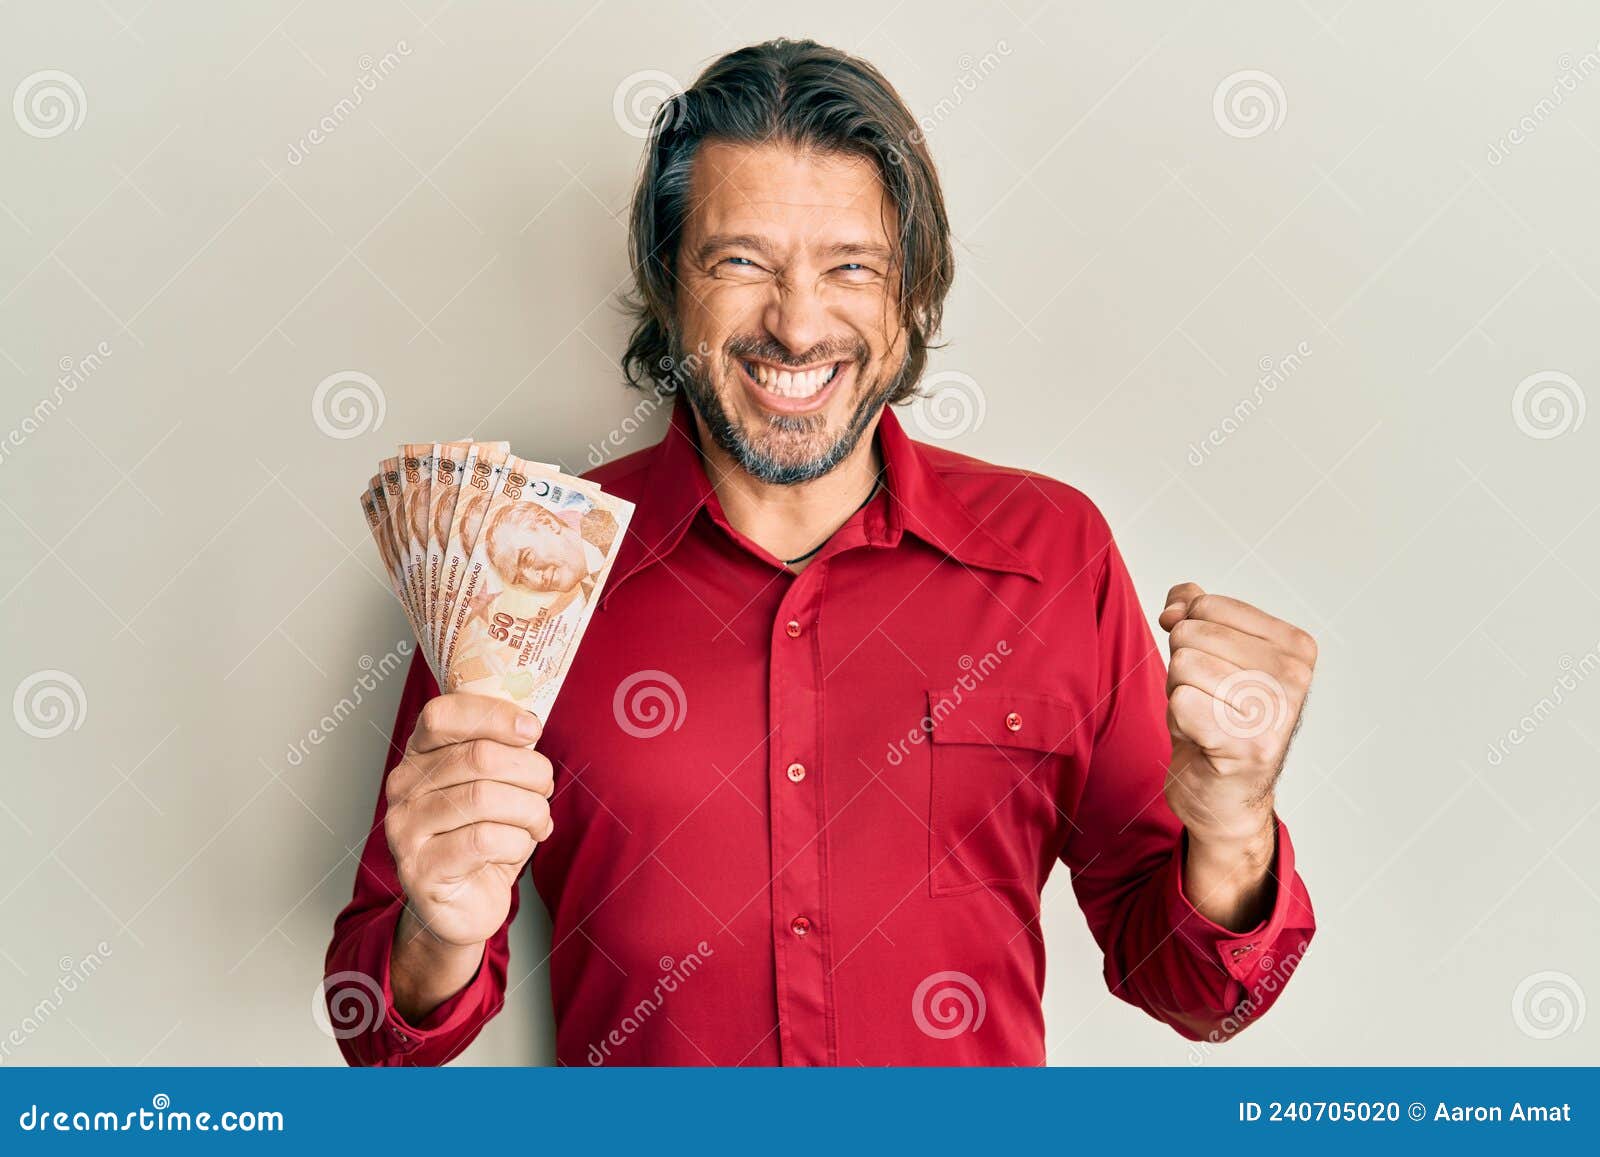 Middle Age Handsome Man Holding 50 Turkish Lira Banknotes Screaming Proud Celebrating Victory